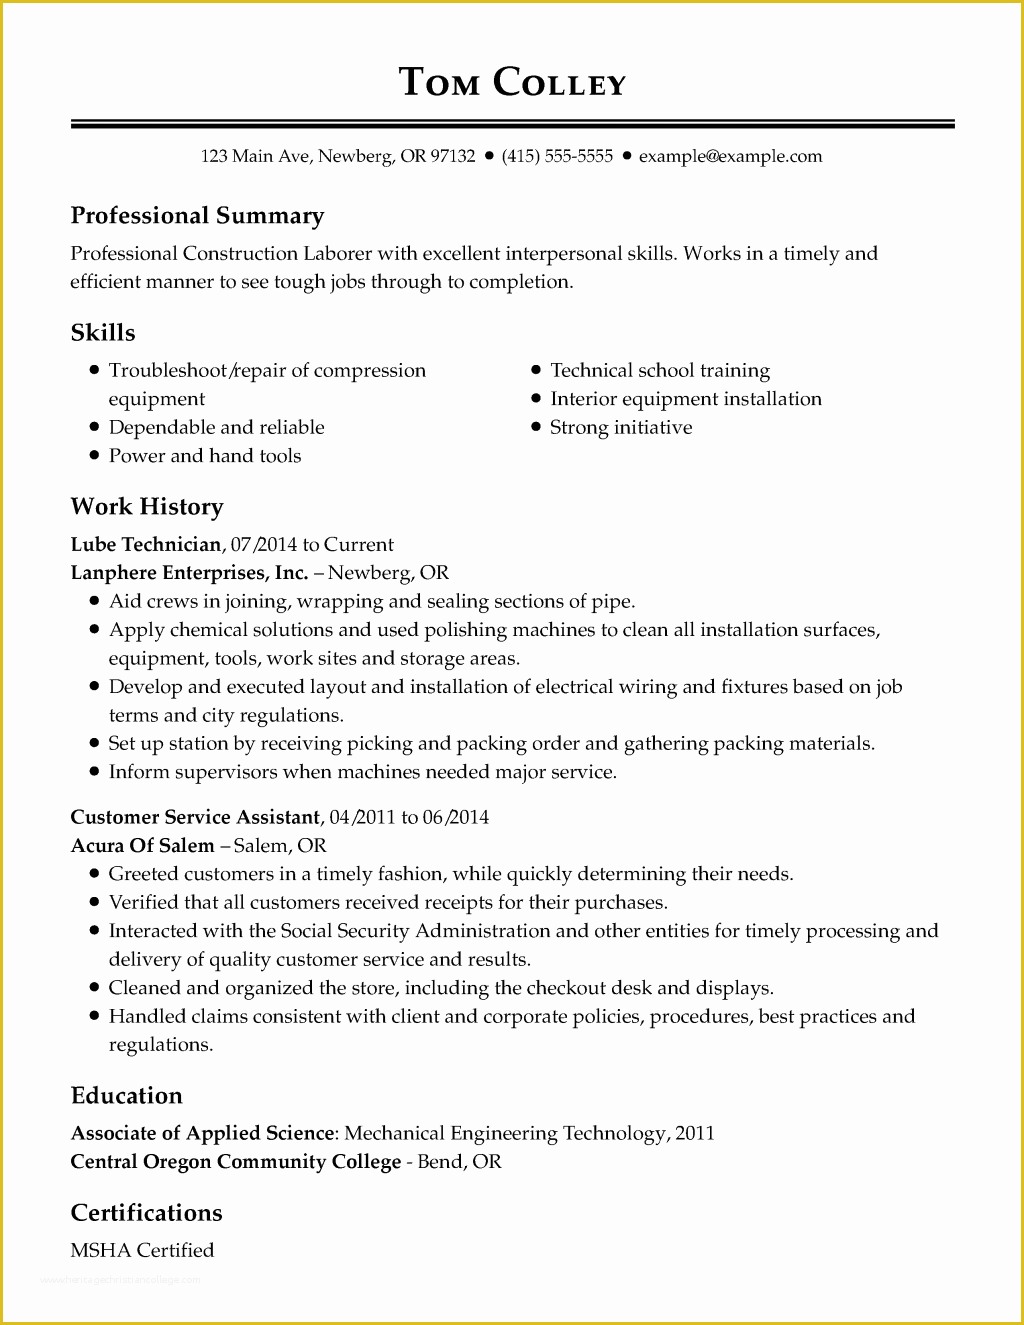 First Job Resume Template Free Of Resume and Template First Job Resume Builder Best and